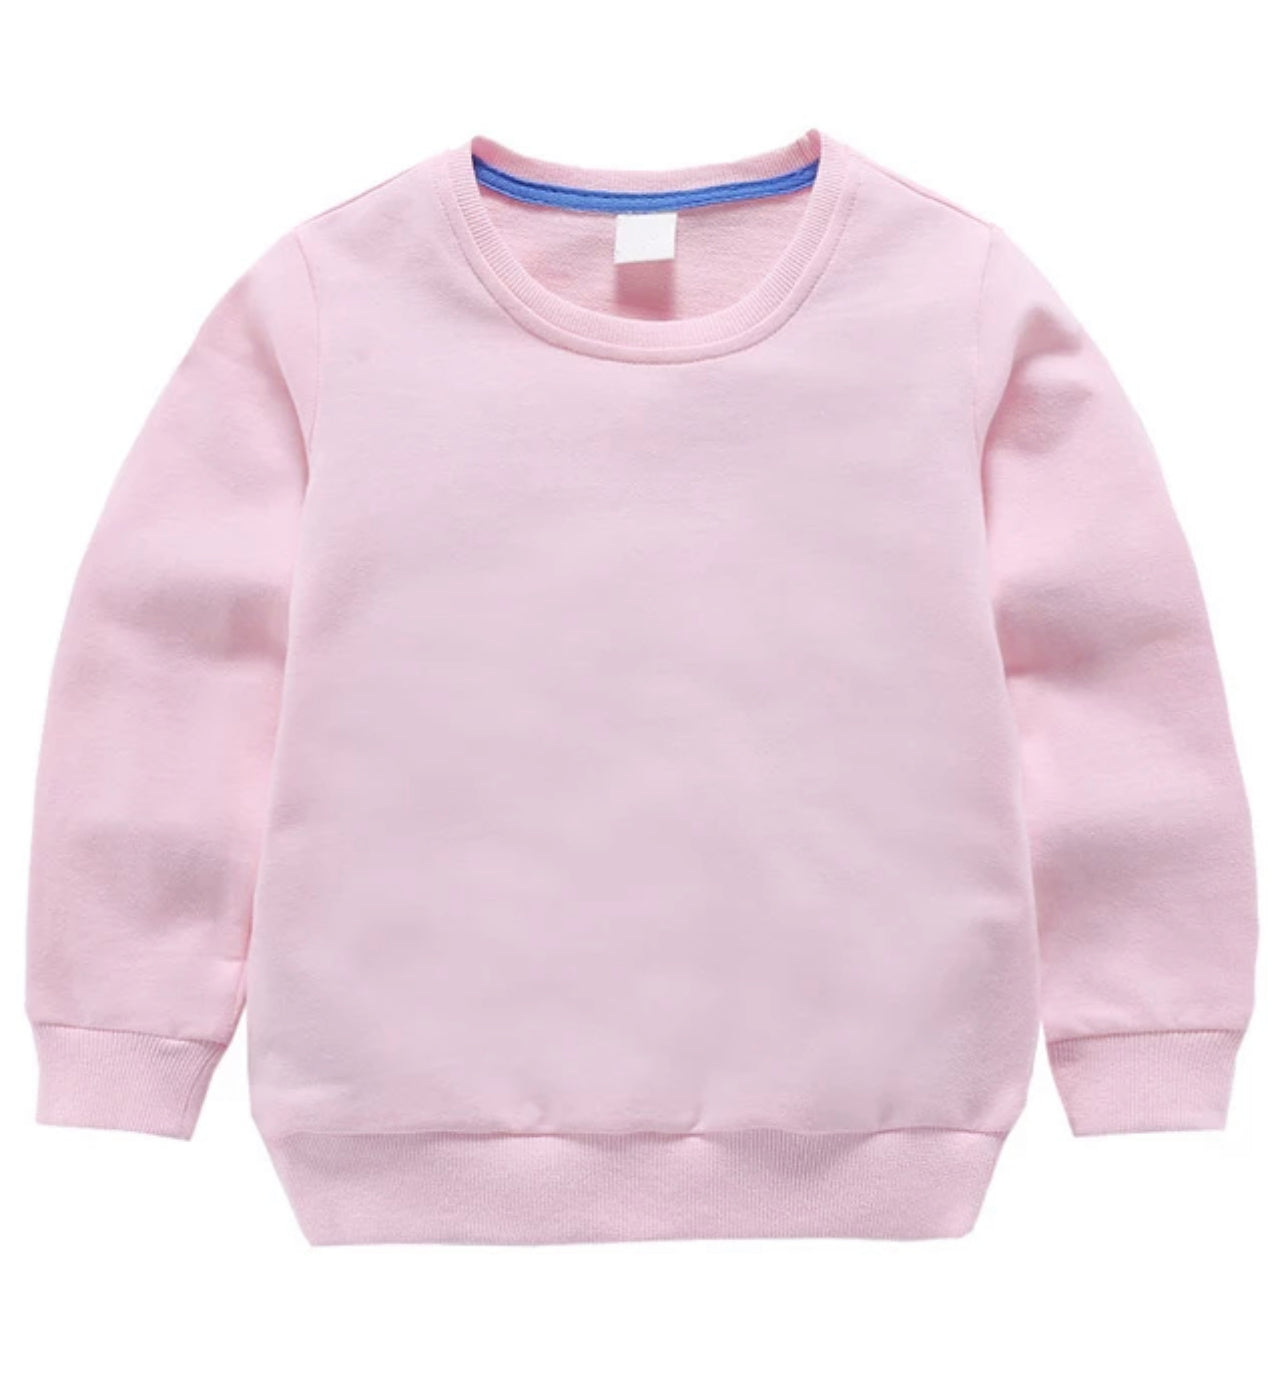 Jumper for Embroidery personalising - Pink and Blue